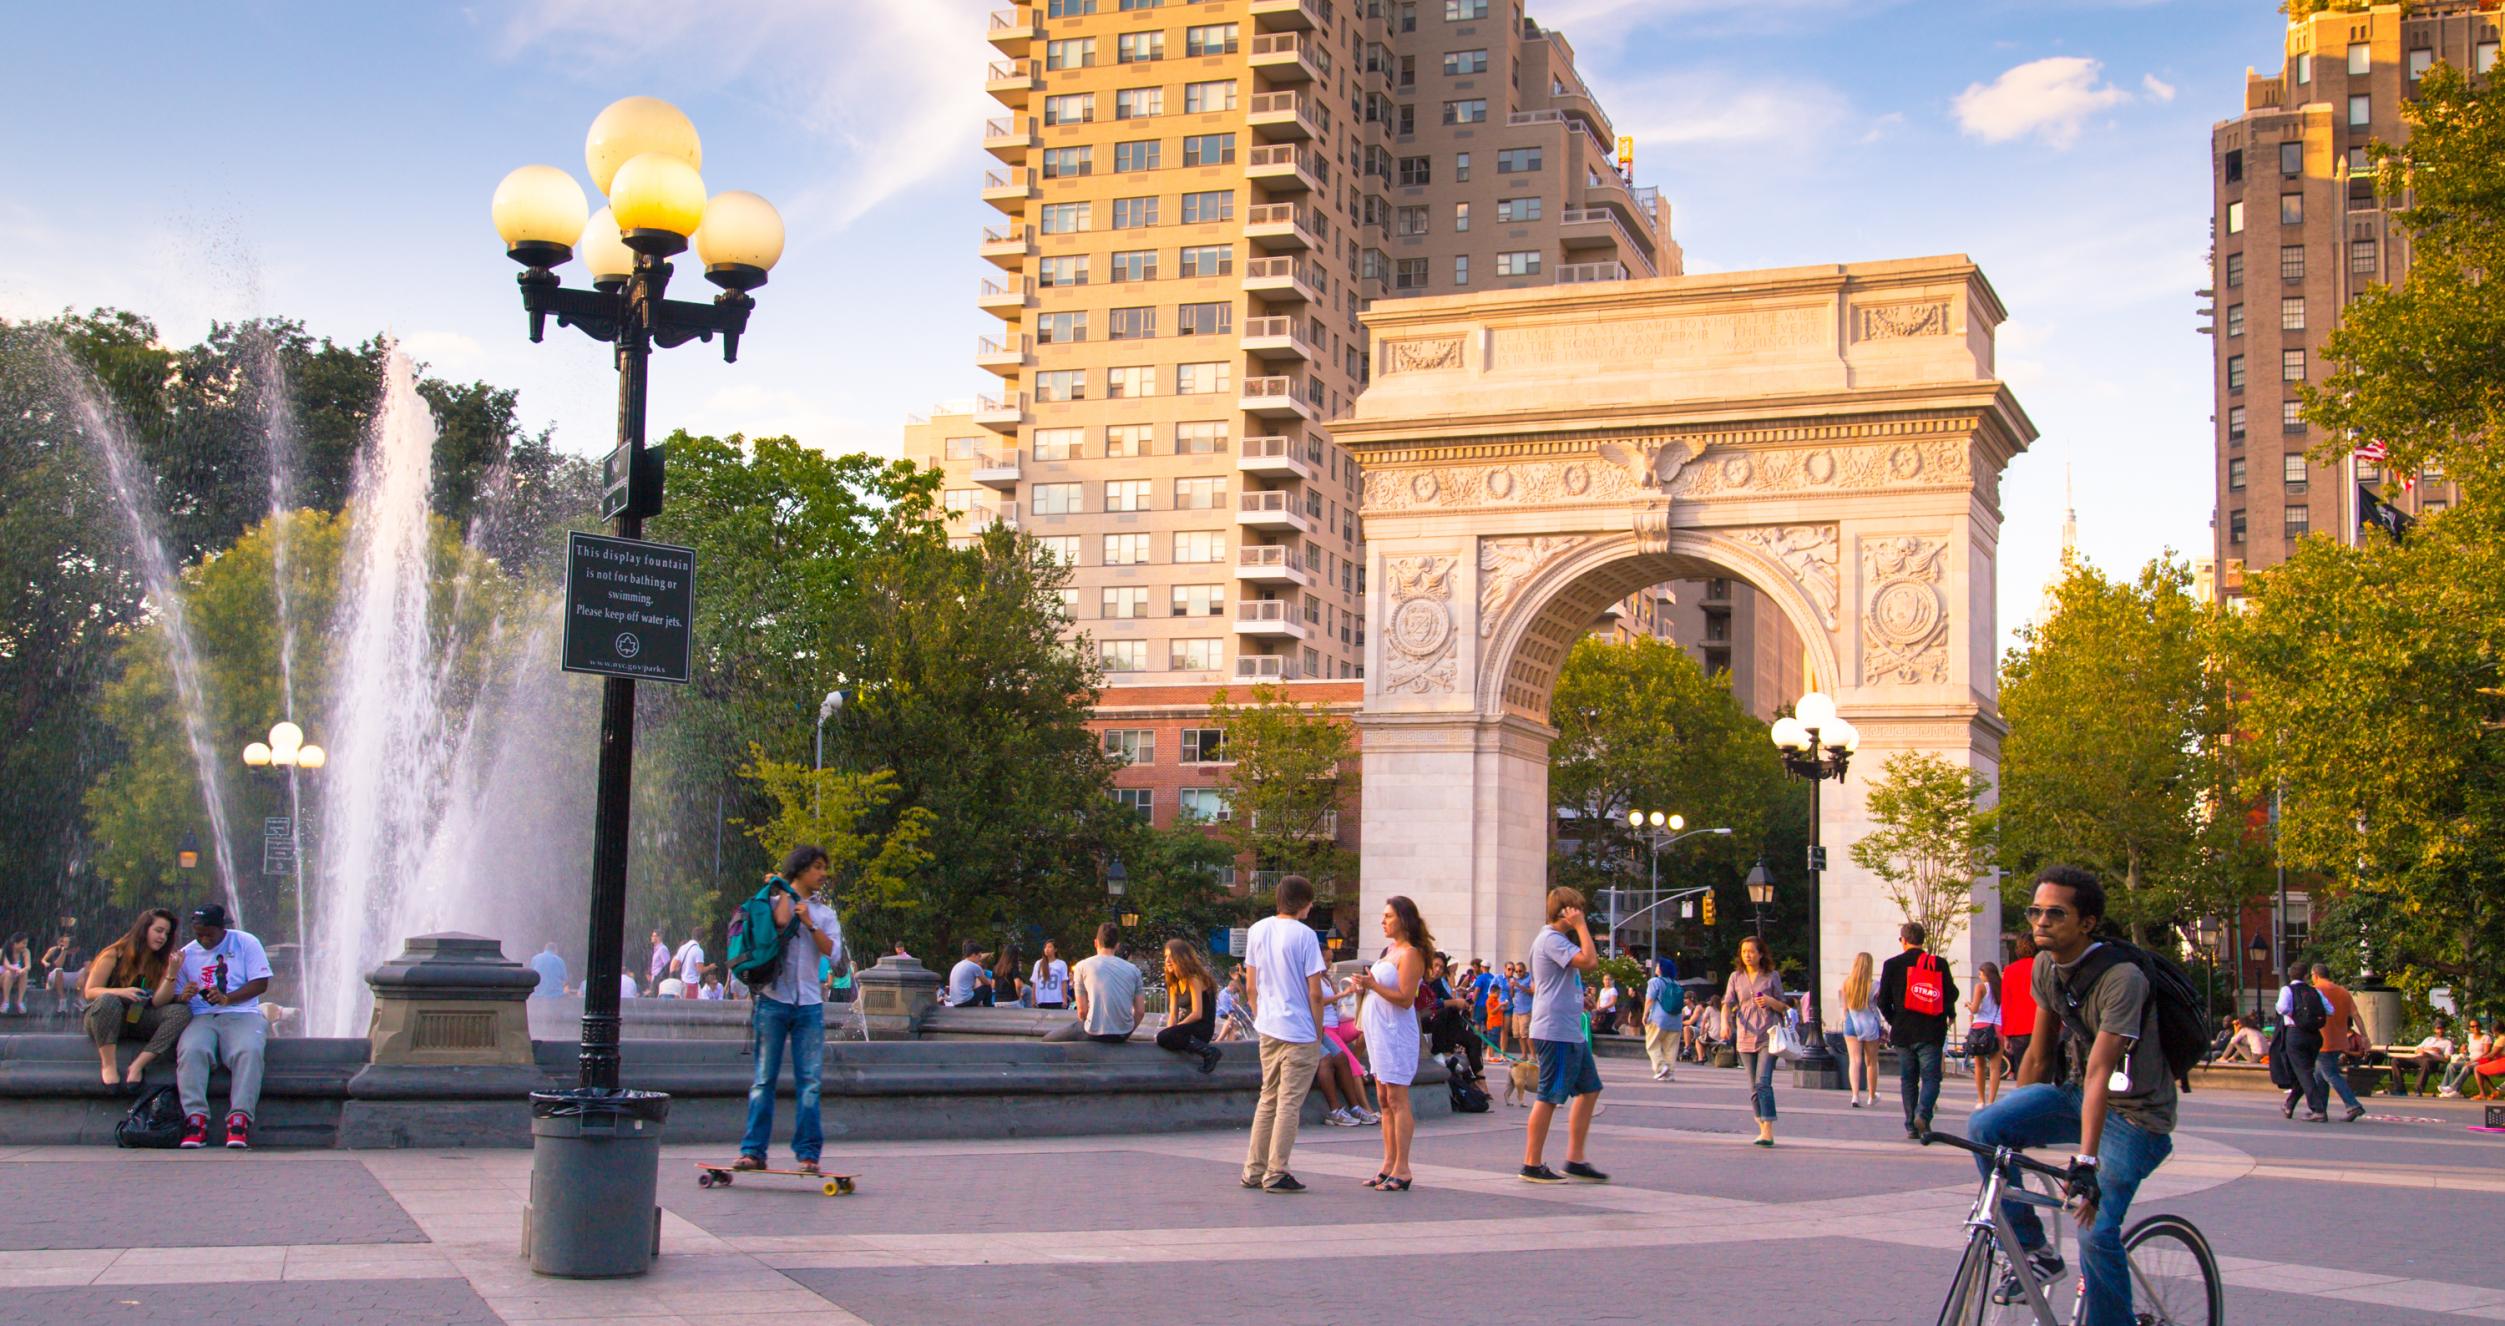 Washington Square Park with the arch and fountain